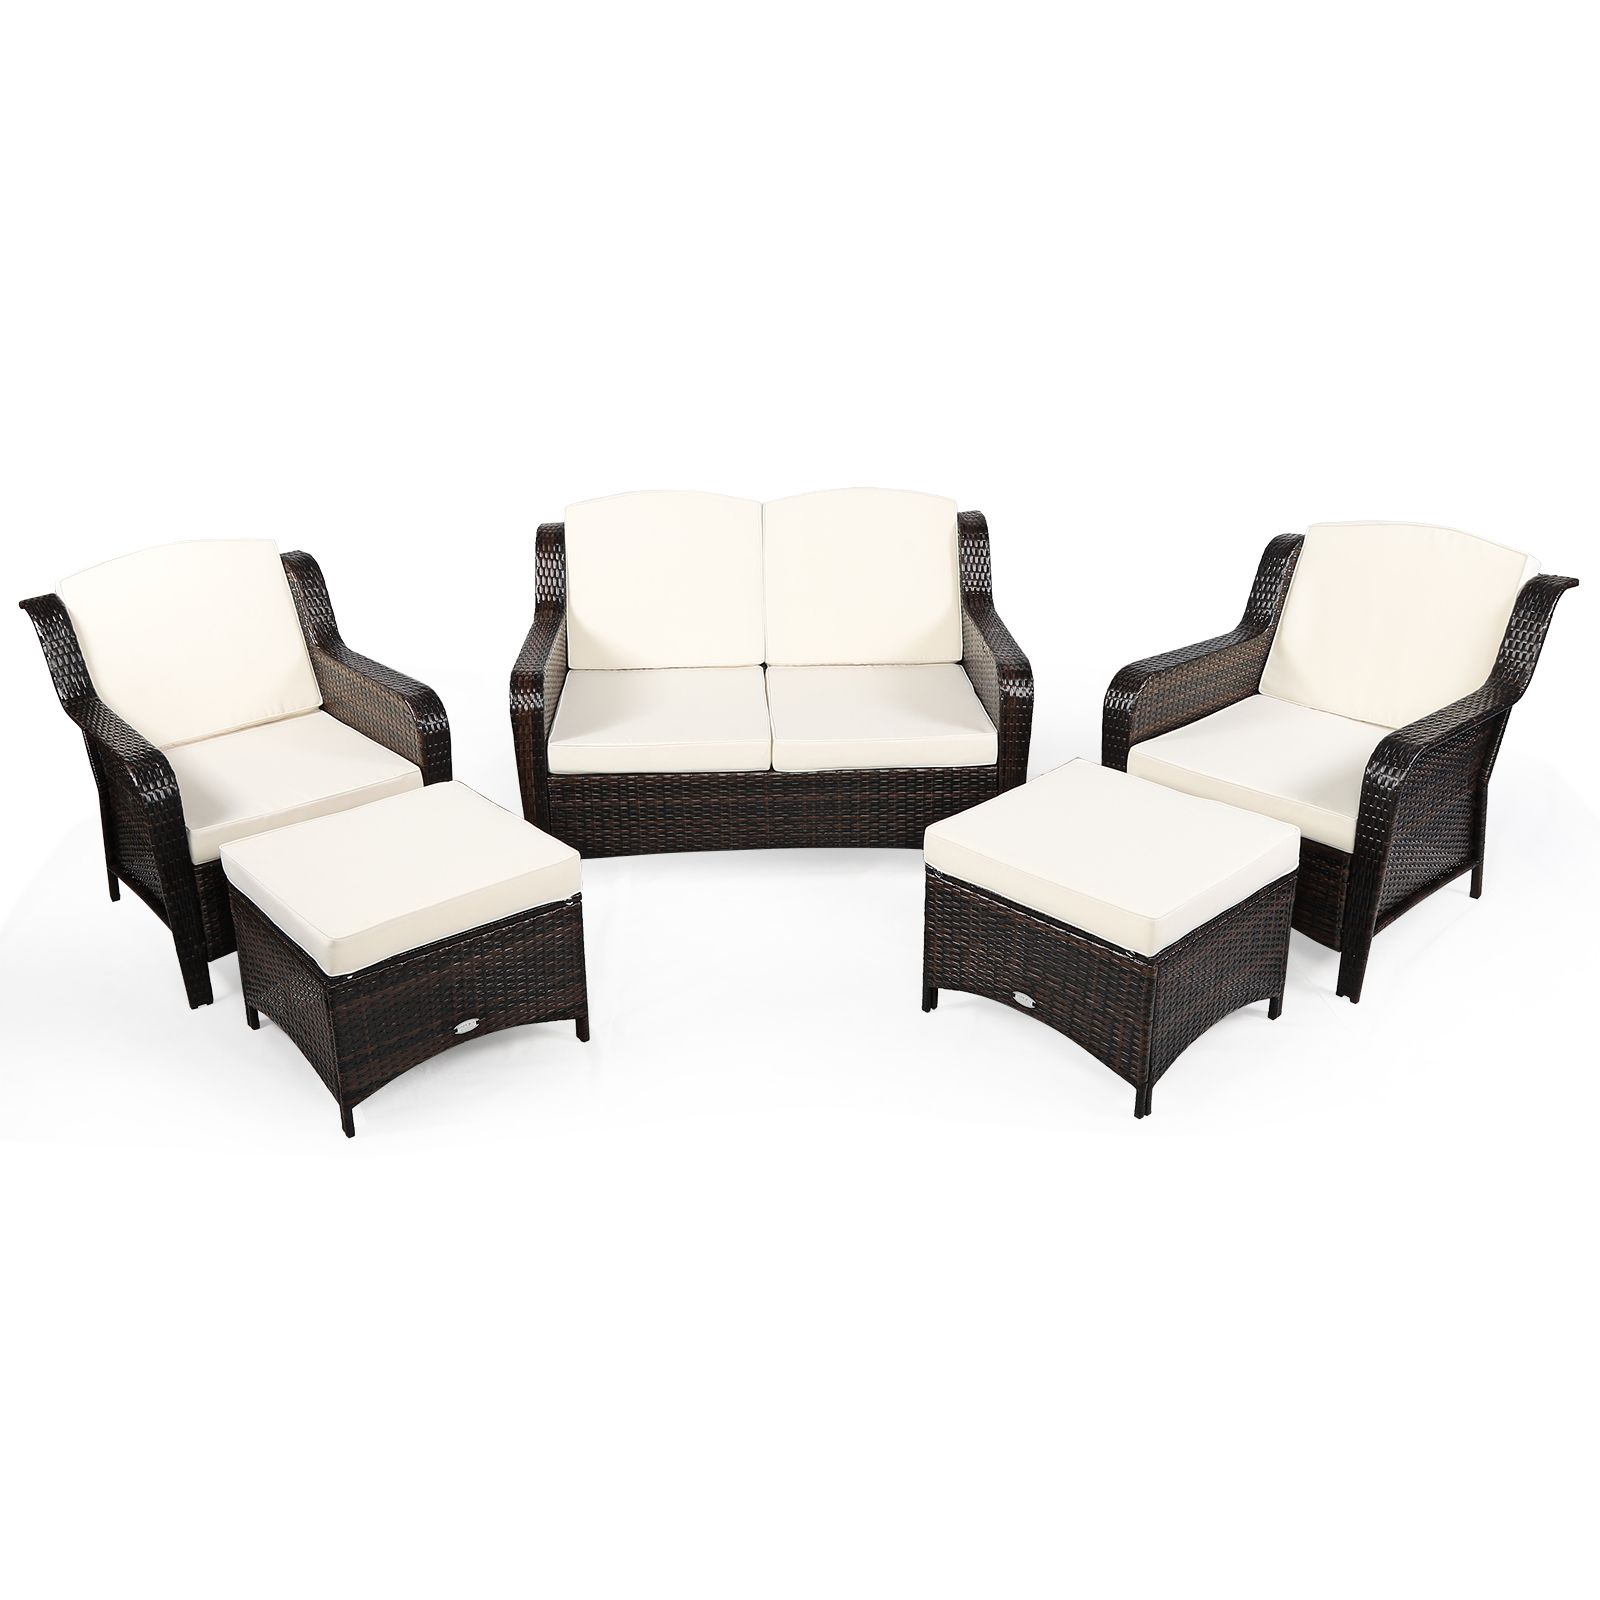 5 Pieces Patio Furniture Set with Removable Cushions and Strong Frame